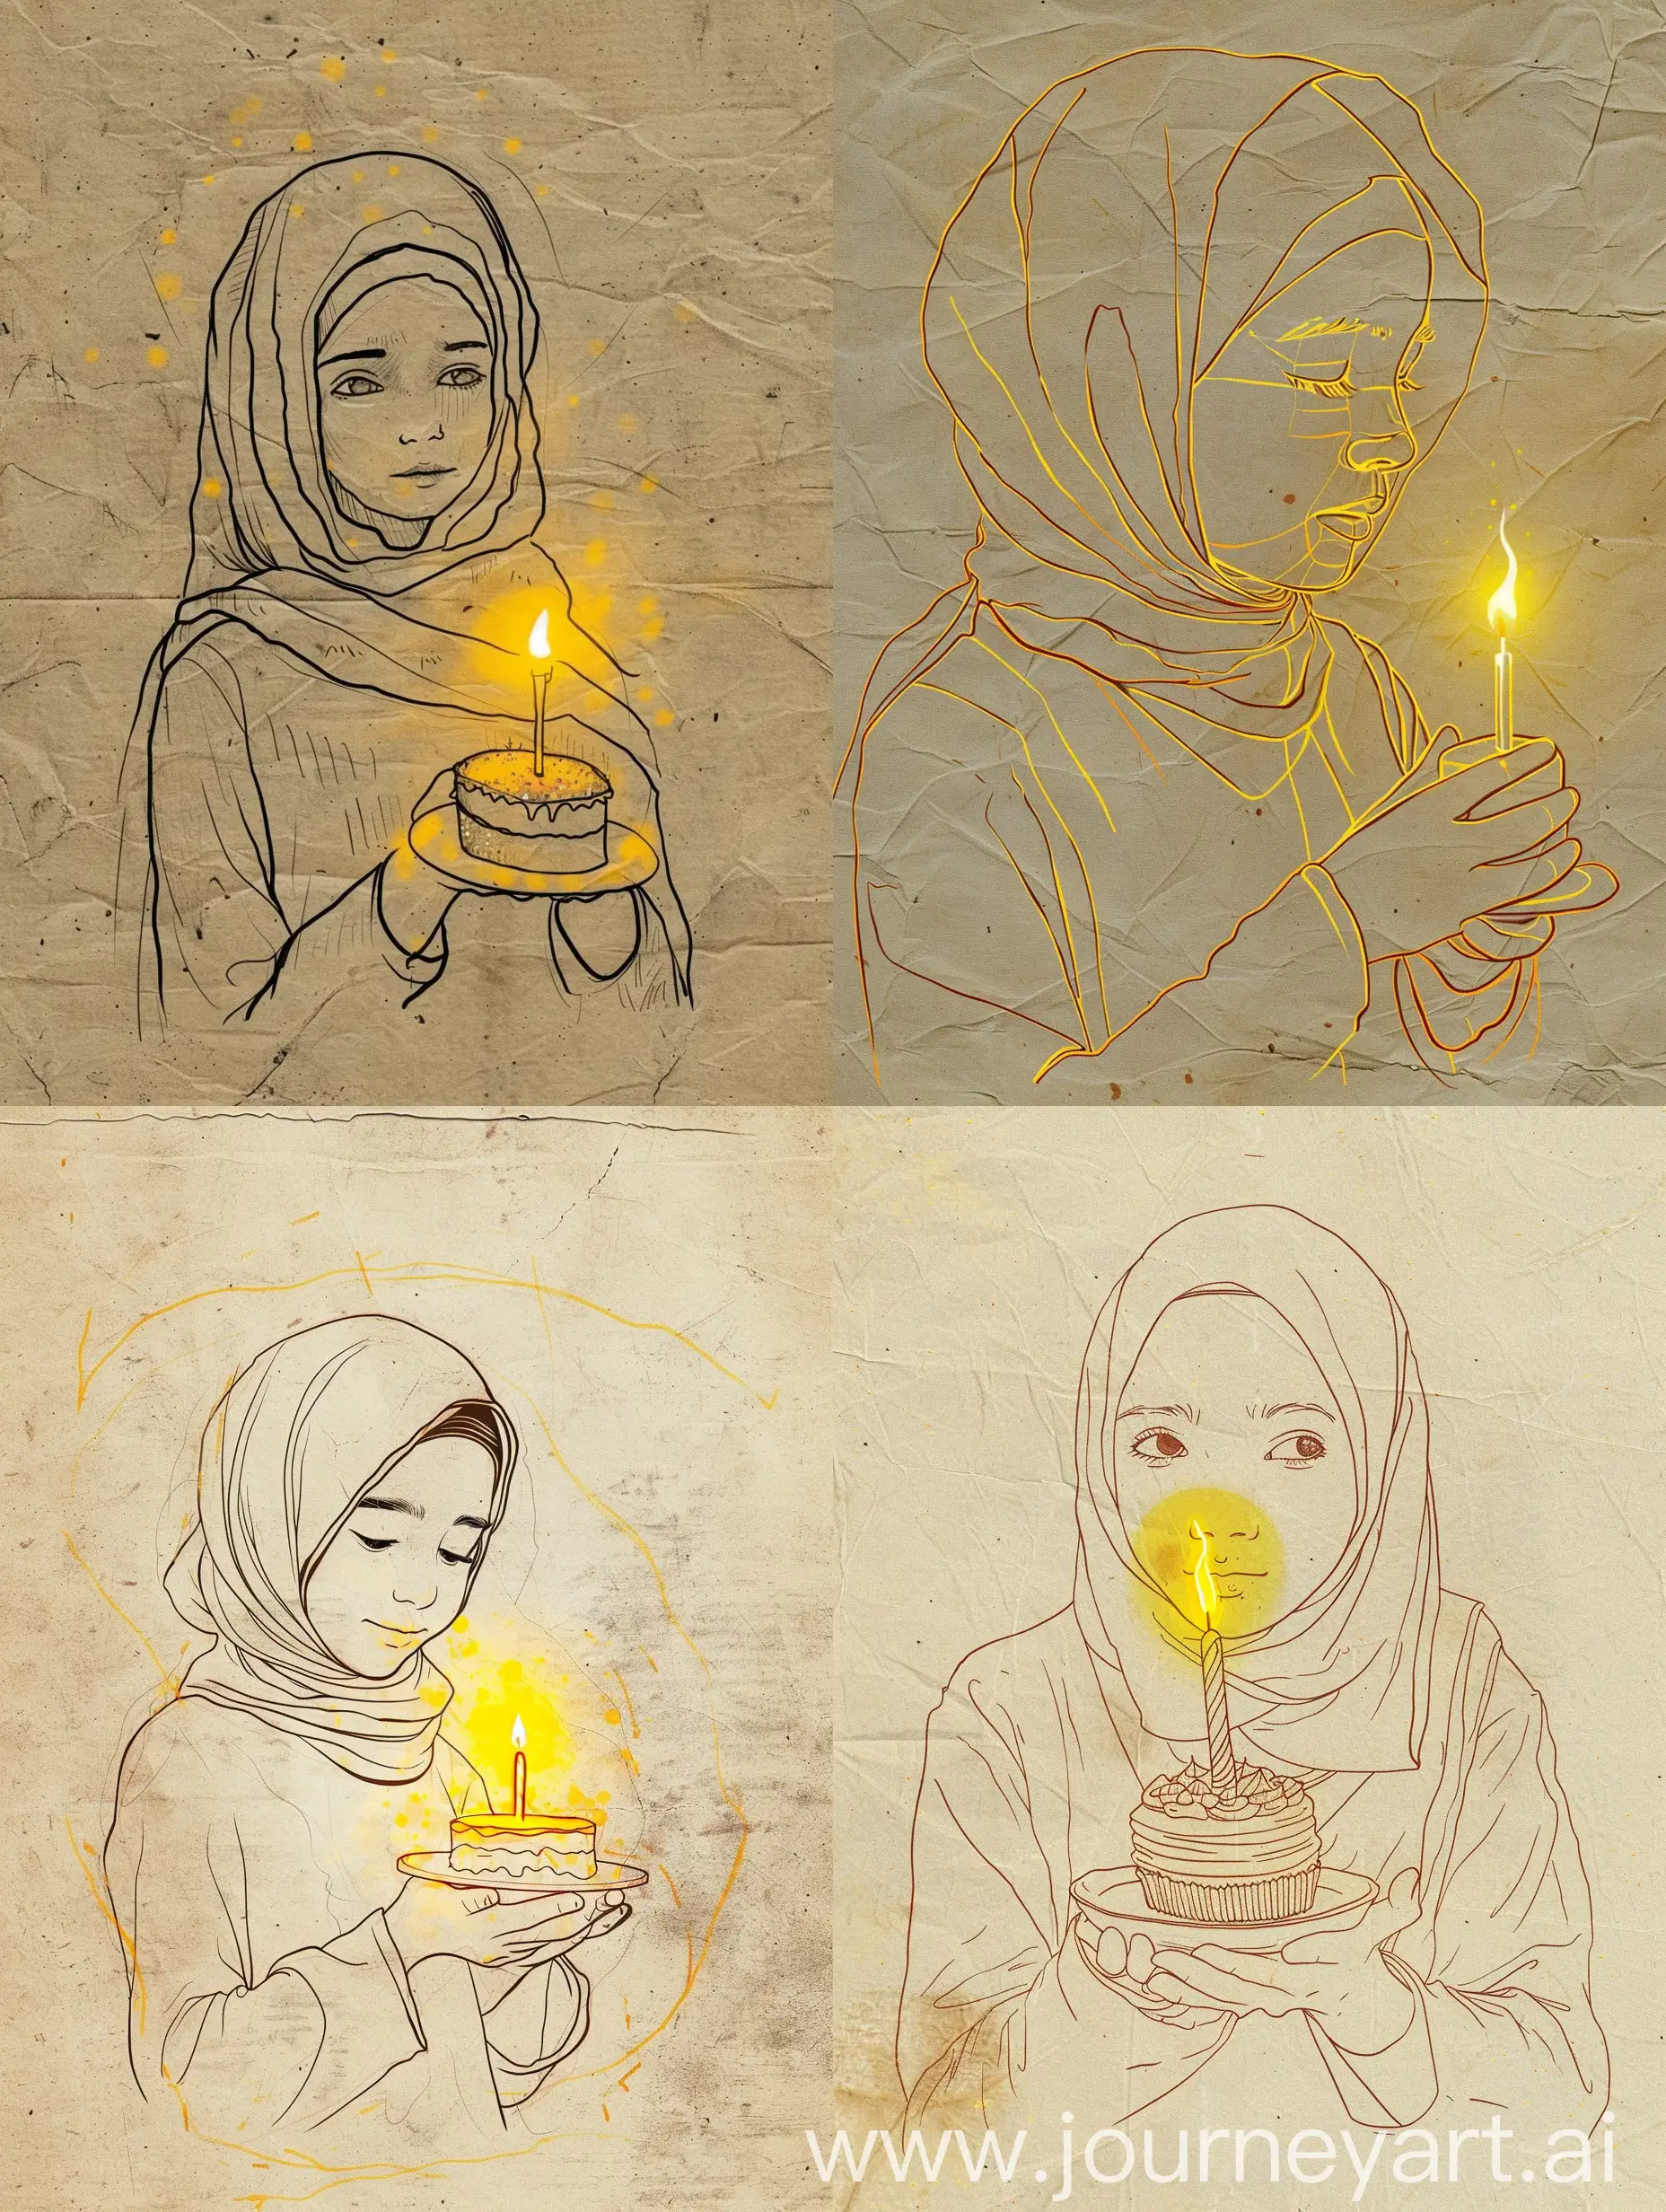 Minimalist-Line-Drawing-Young-Girl-in-Hijab-Holding-Birthday-Cake-with-Lit-Candle